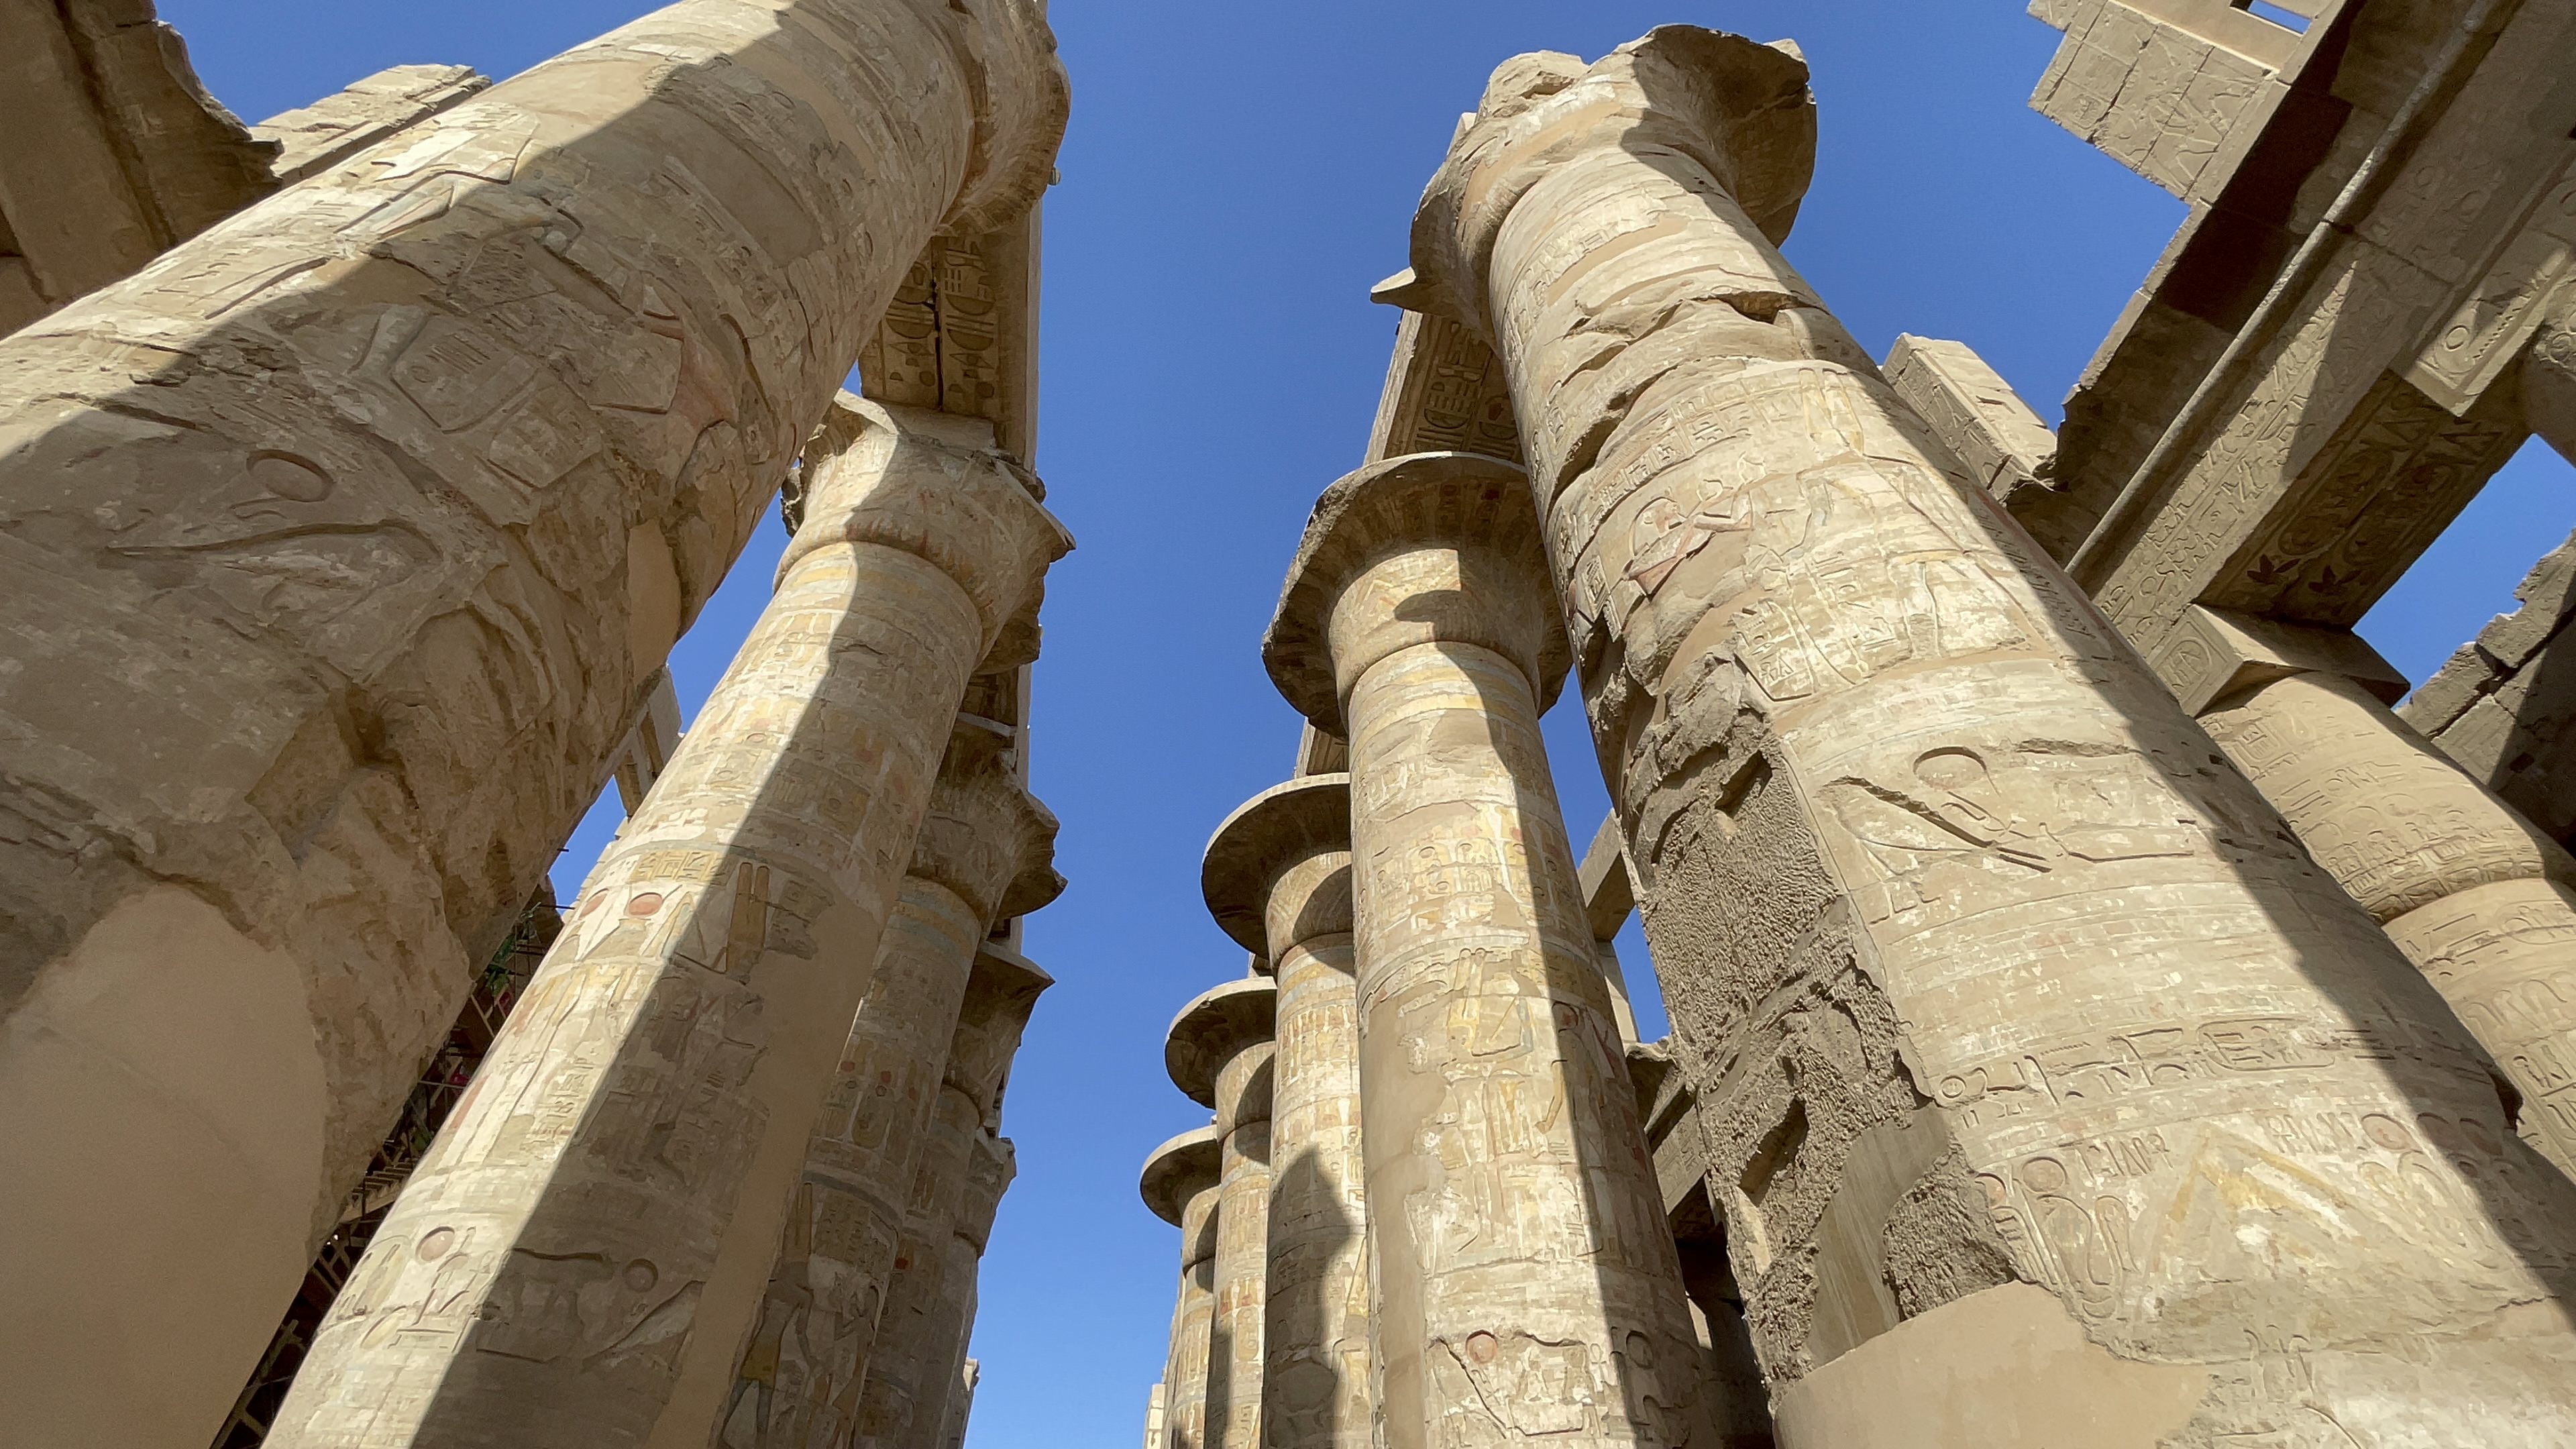 Hypostyle Hall of the Temple of Karnak from Seti I and Ramses II